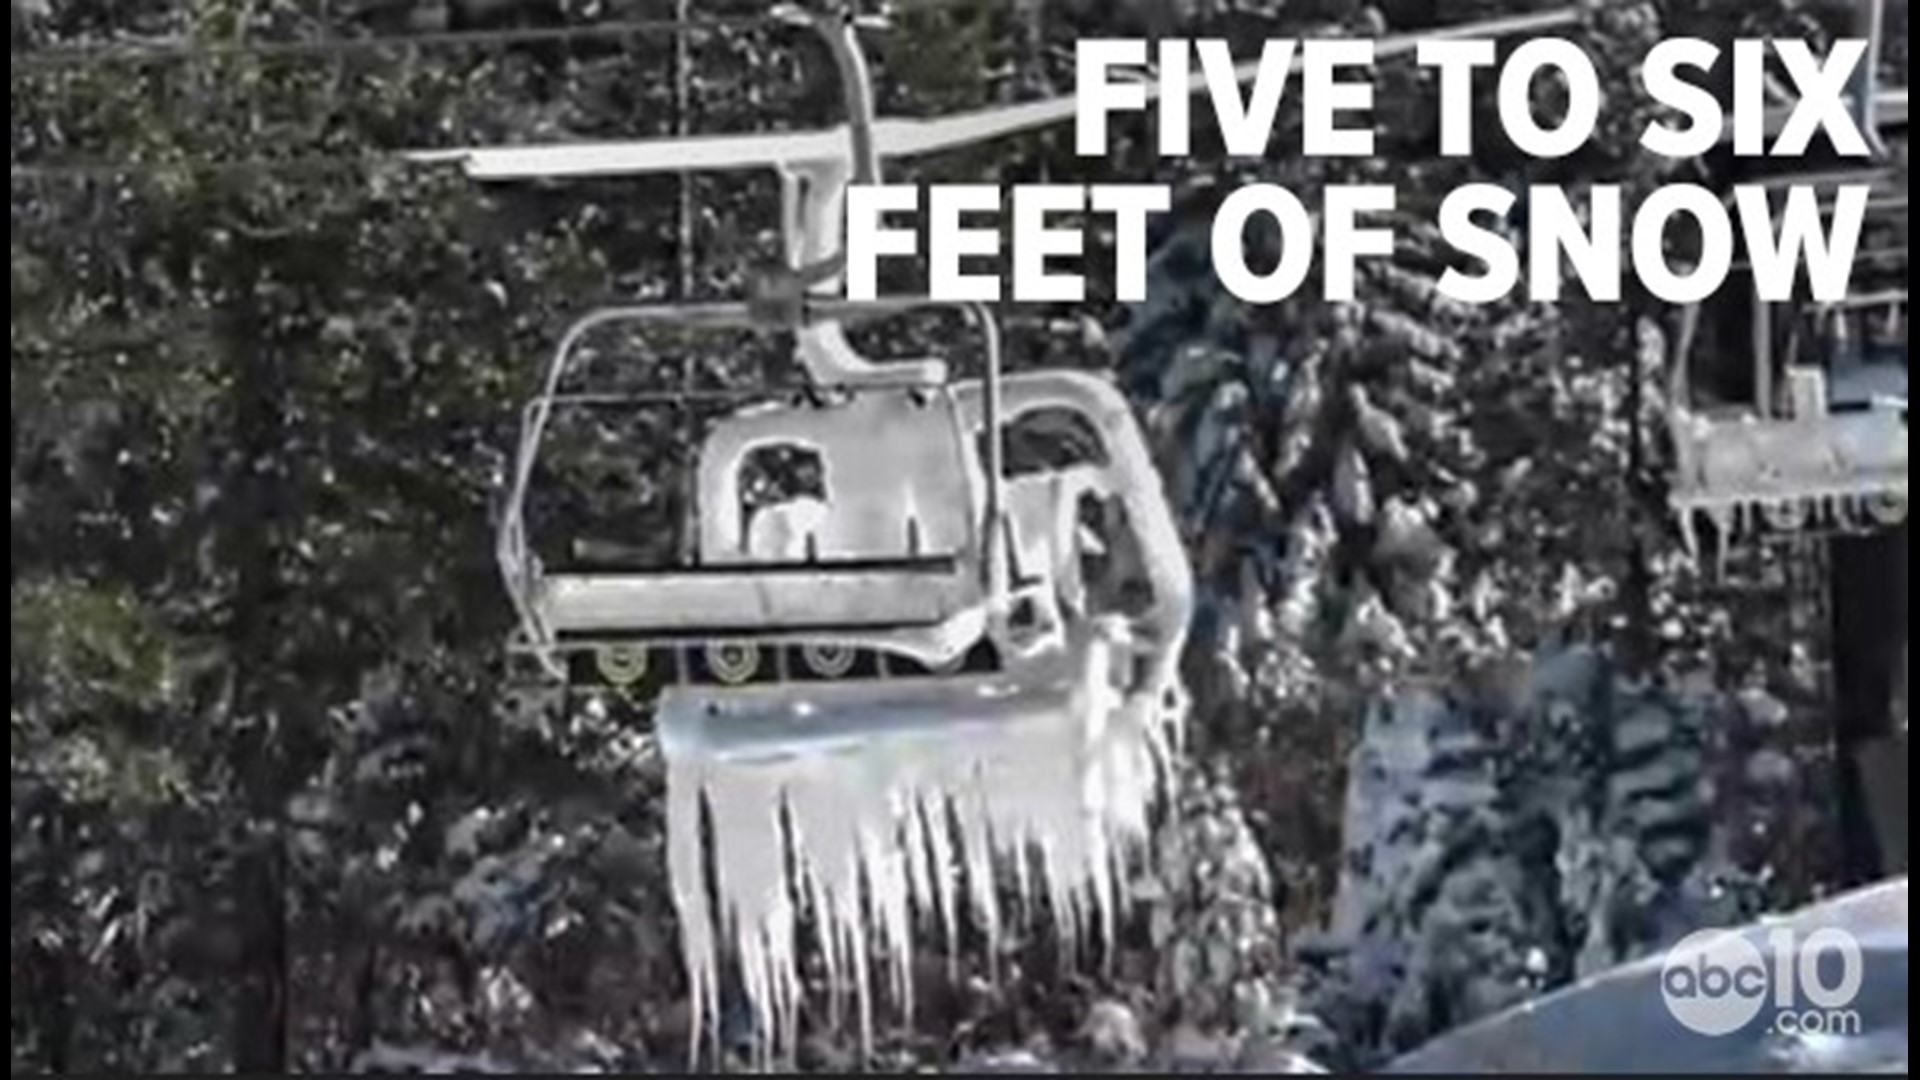 Through the most recent snow storm, one ski resort told ABC10 they got 5 to 6 feet of snow, and they're powering their snow cannons nonstop.